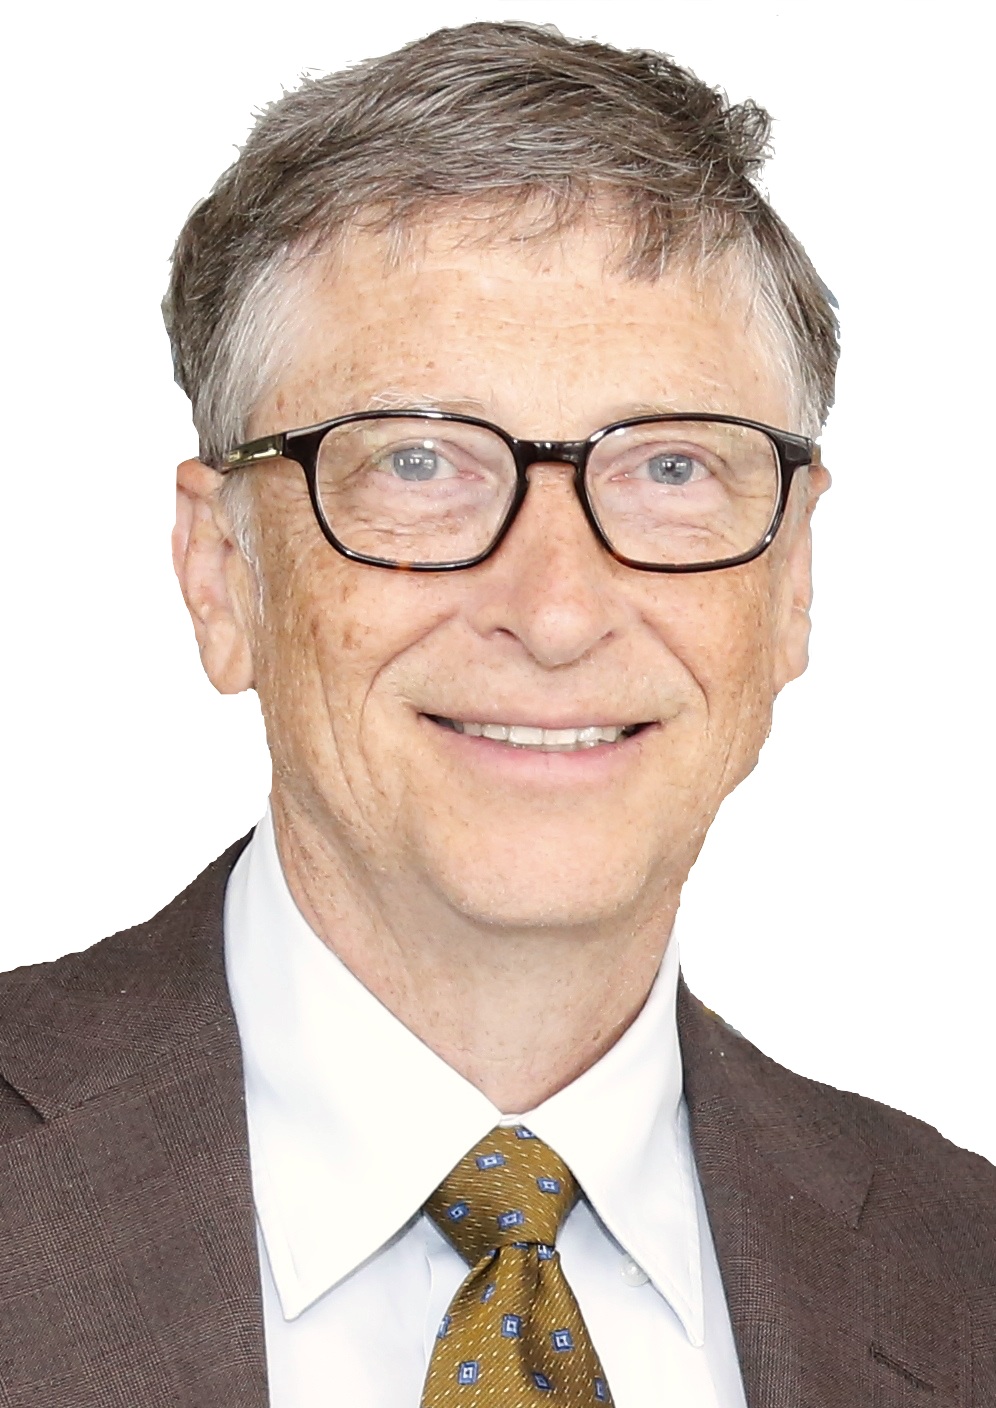 bill gates face png image #42391